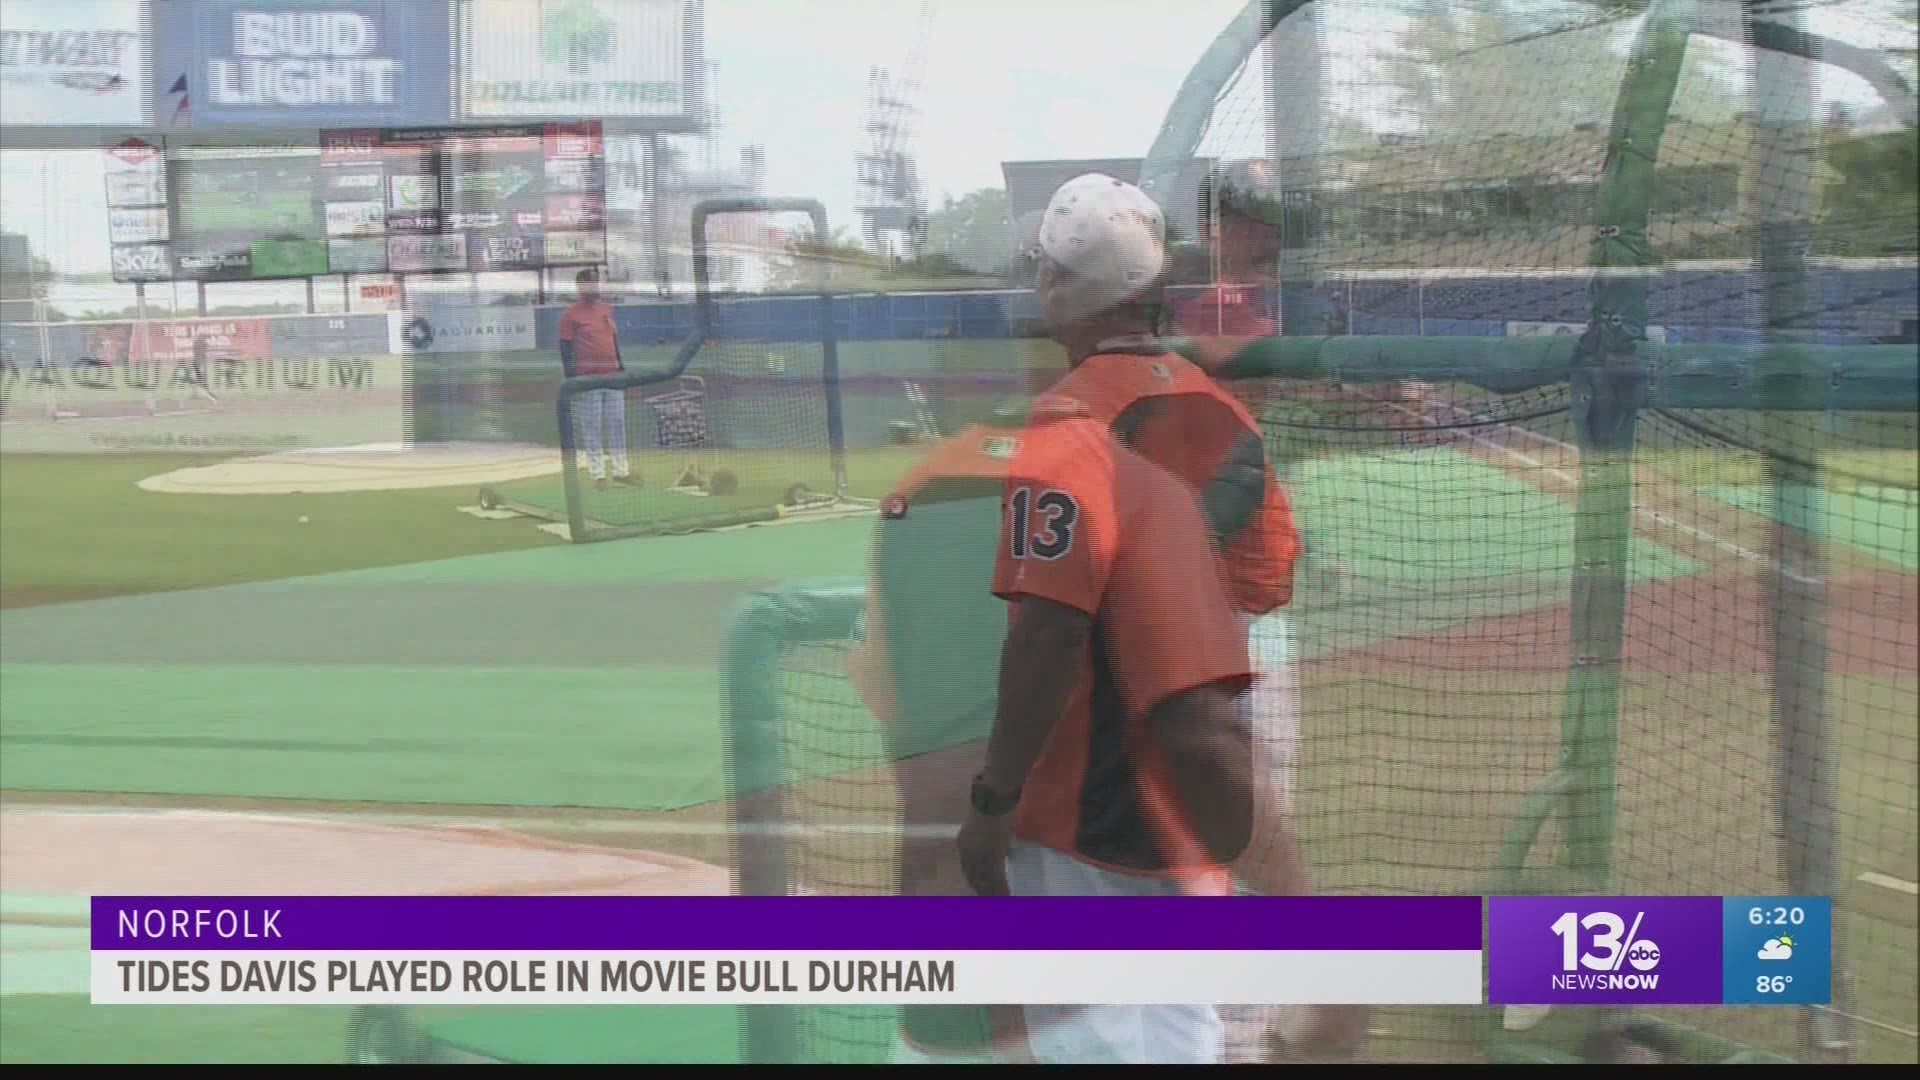 Tides hitting coach, Butch Davis talks about how he played a role as an extra in a film that's still talked about 30 years later in "Bull Durham".